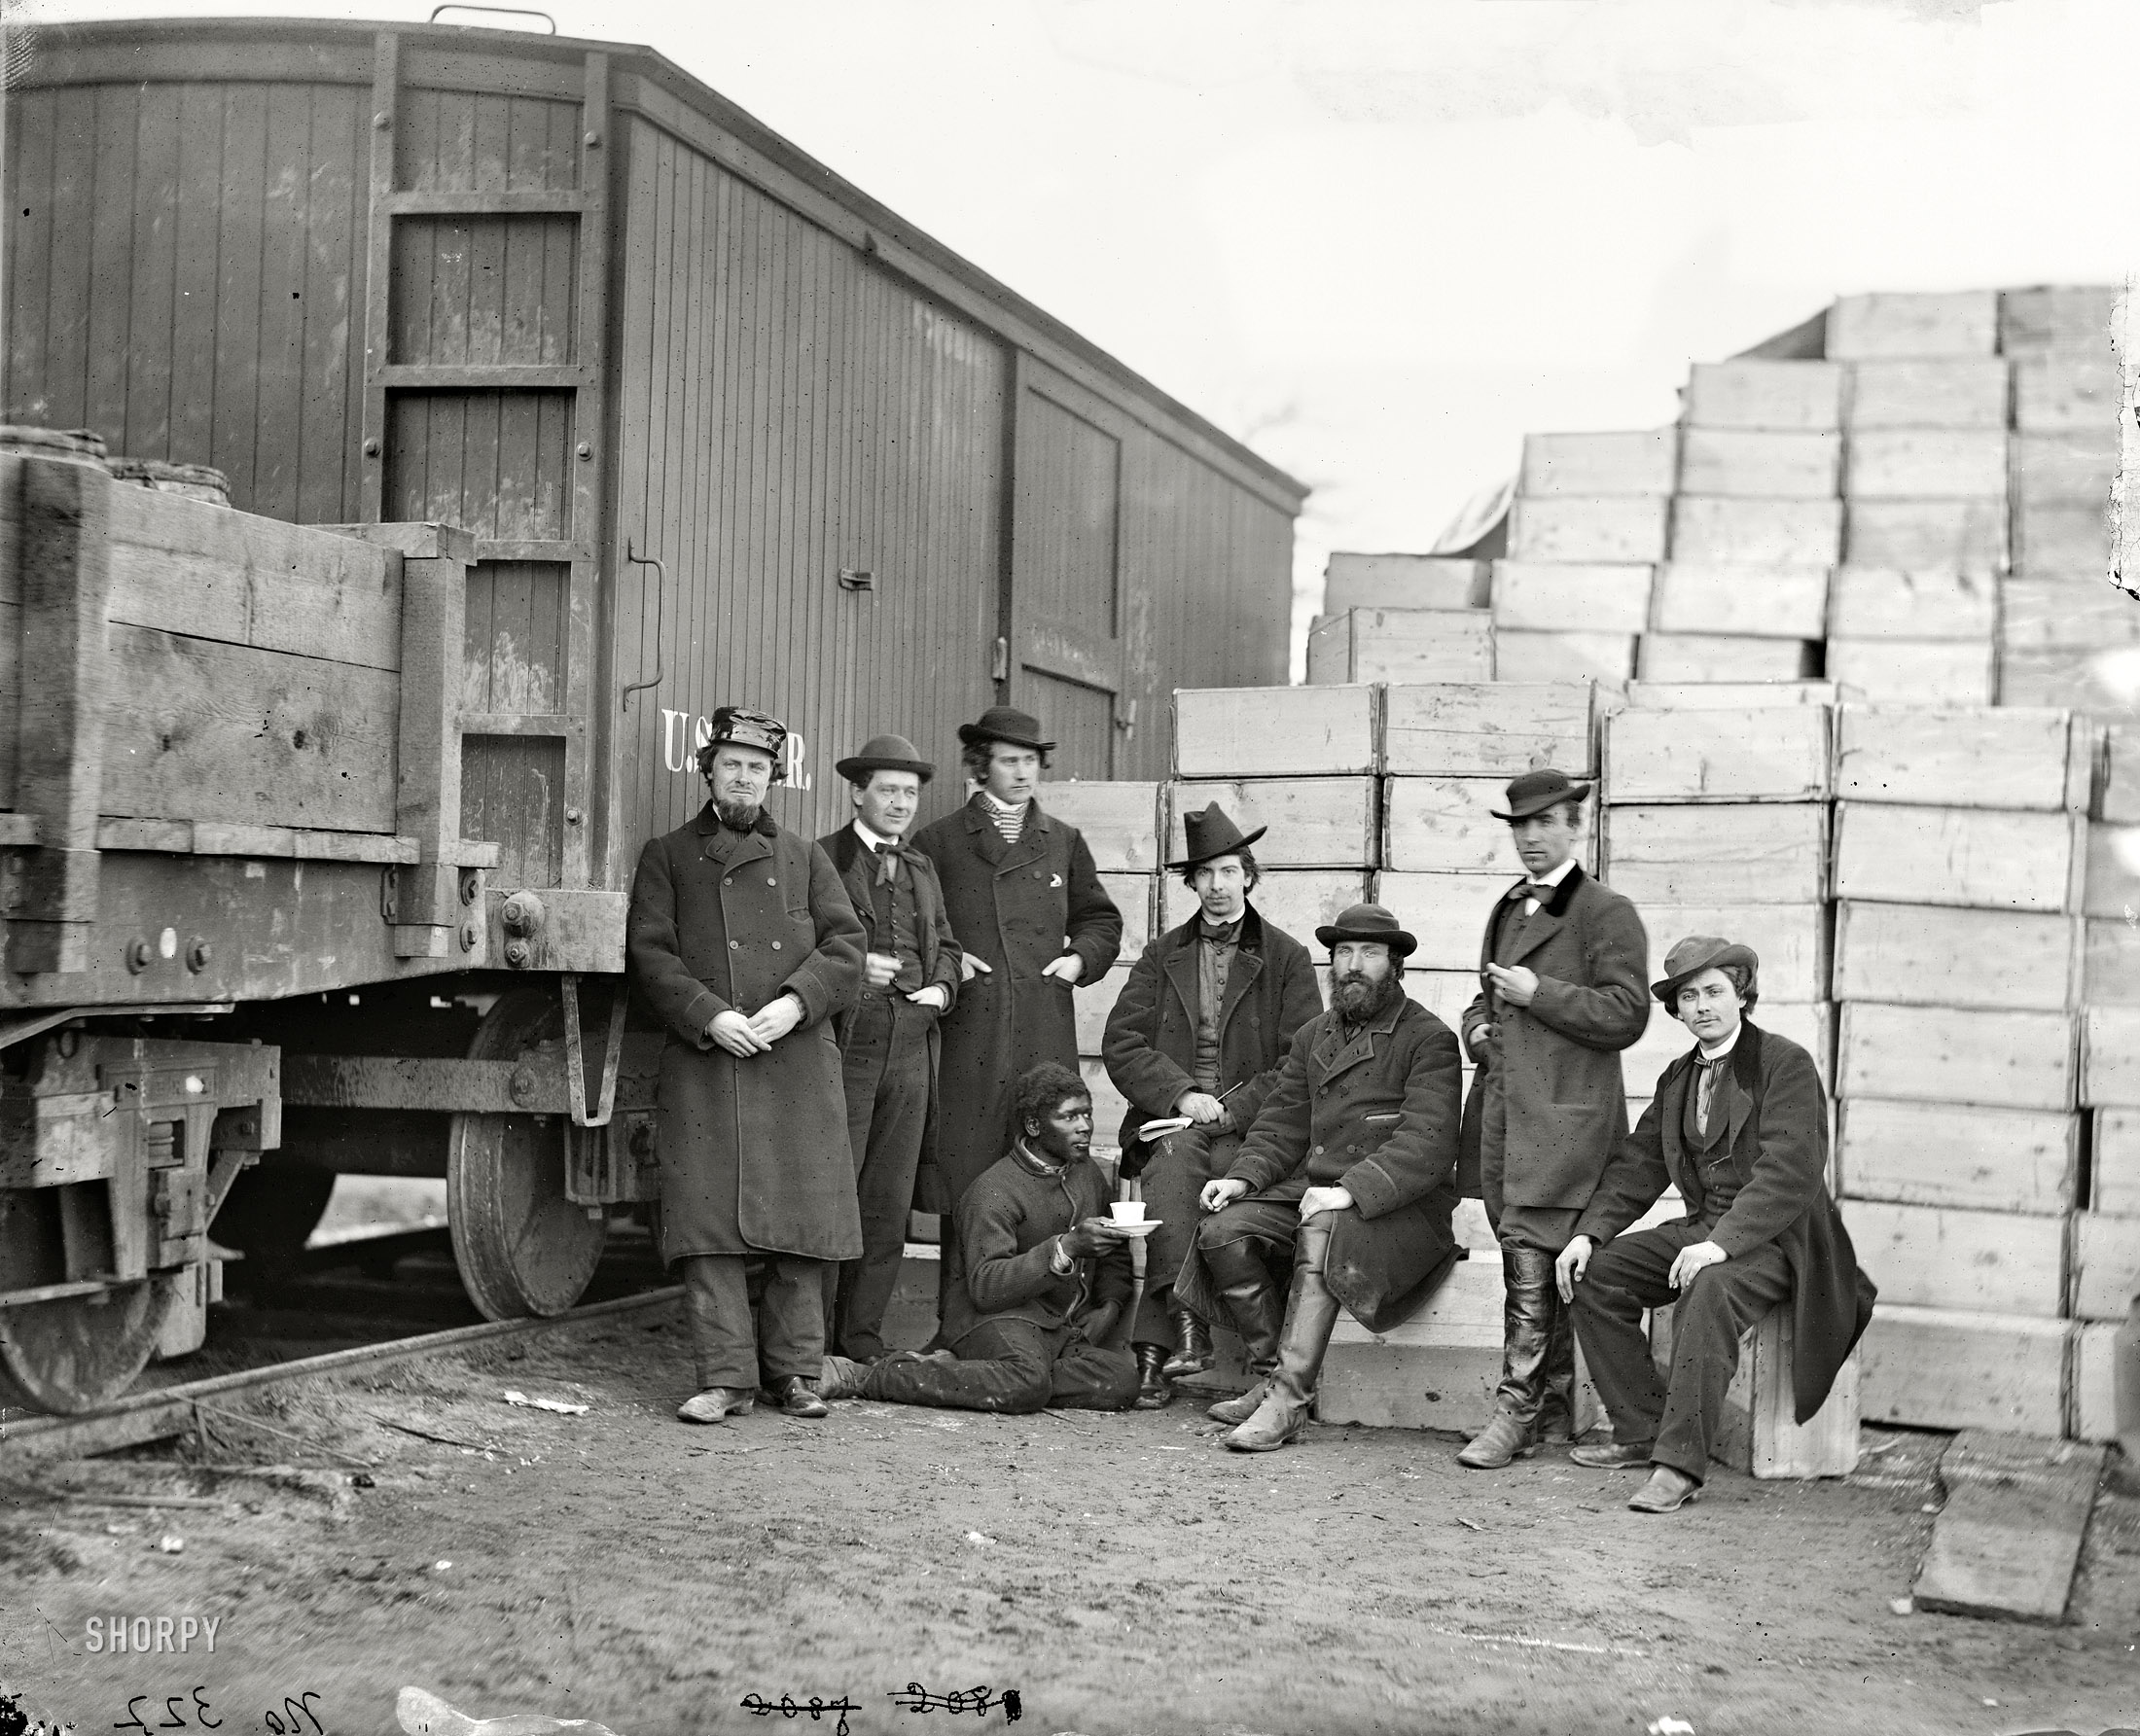 Aquia Creek Landing, Virginia, circa 1863. "Federal Army. Clerks of the Commissary Depot by railroad car and packing cases." A somewhat unsettling scene. Wet plate glass negative by Alexander Gardner. View full size.